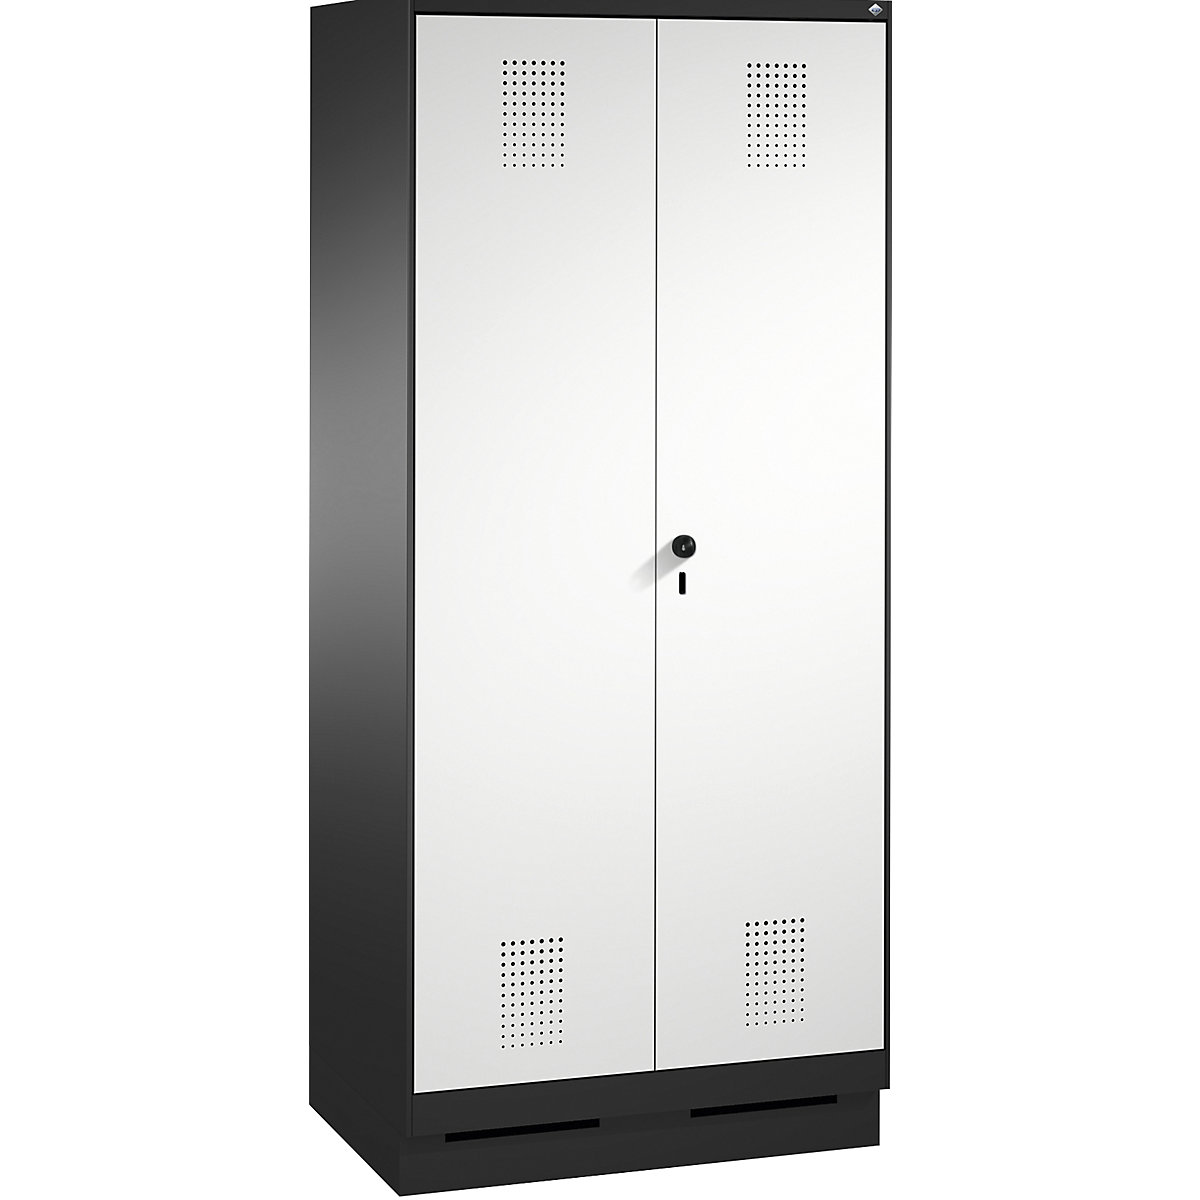 EVOLO laundry cupboard / cloakroom locker – C+P, 4 shelves, clothes rail, compartments 2 x 400 mm, with plinth, black grey / light grey-10